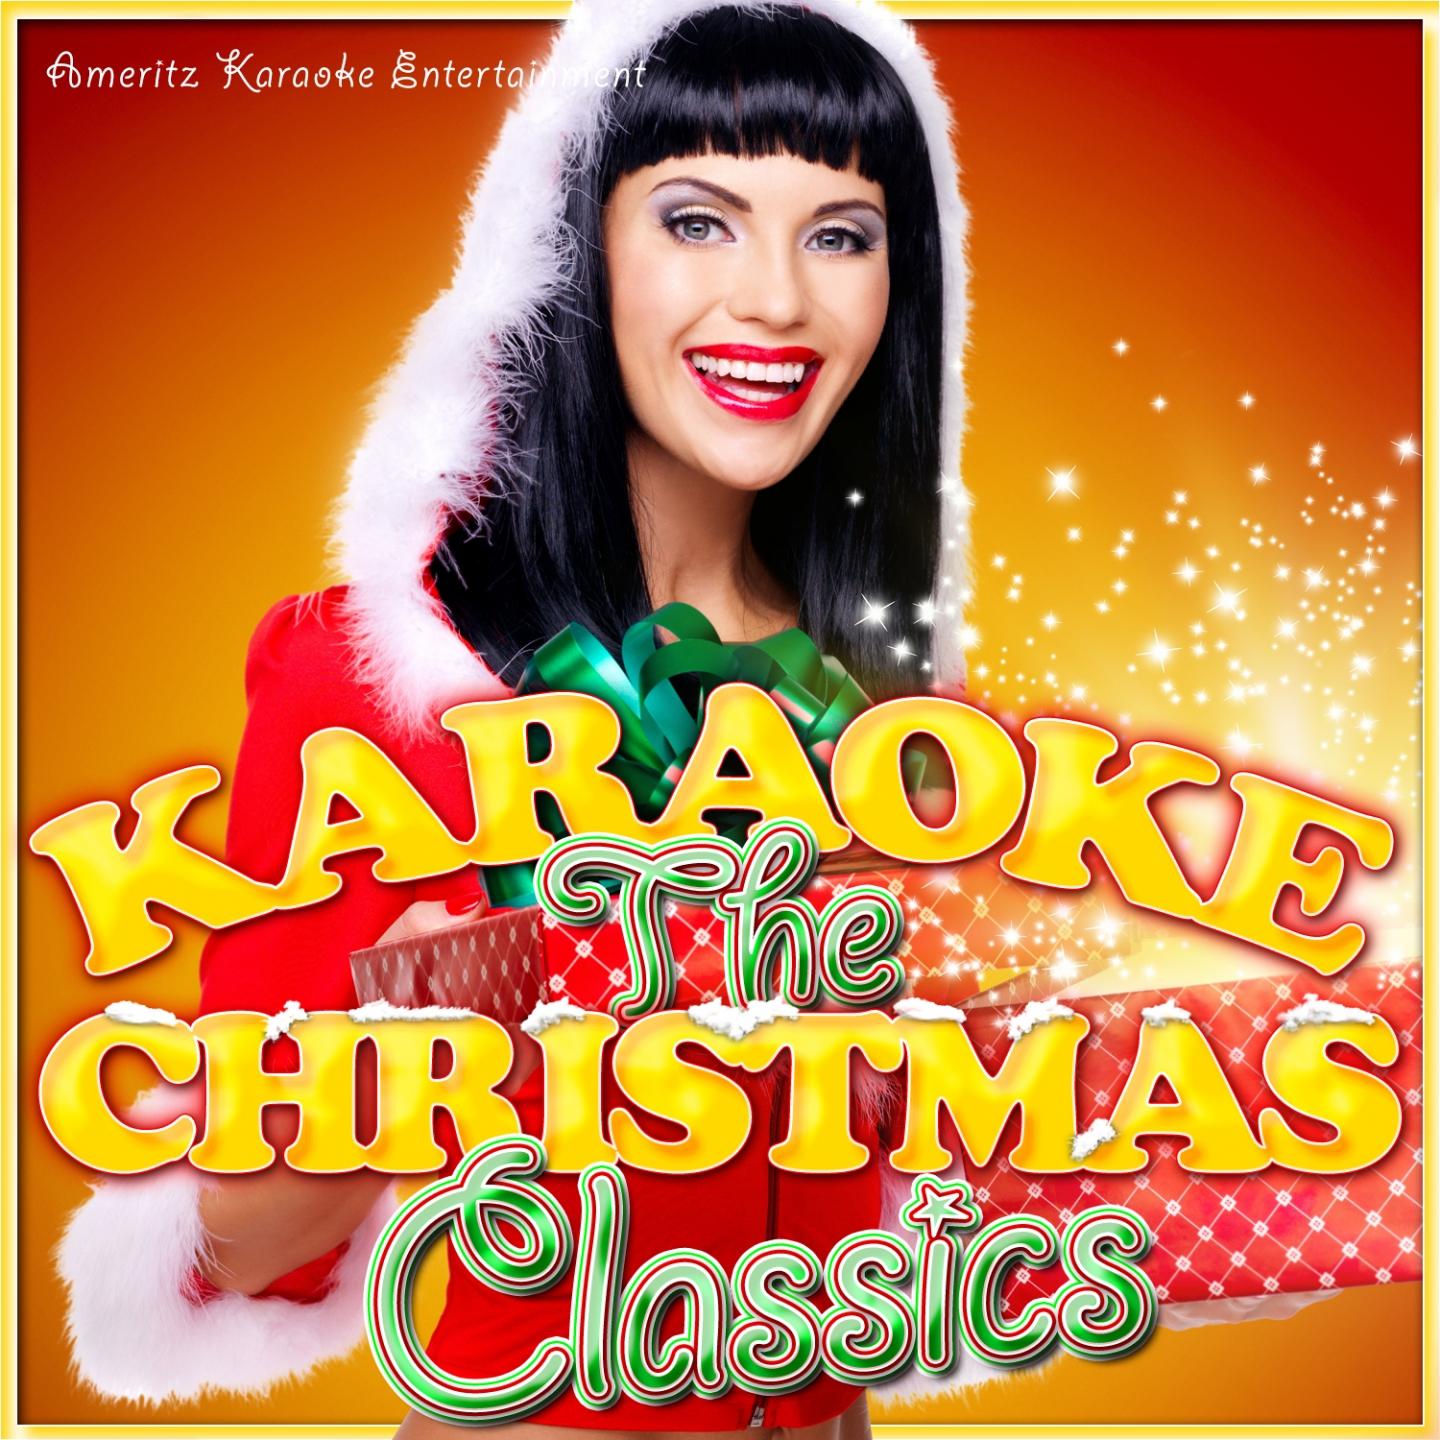 The Christmas Song (Karaoke Version) [Originally Performed By Michael Buble]